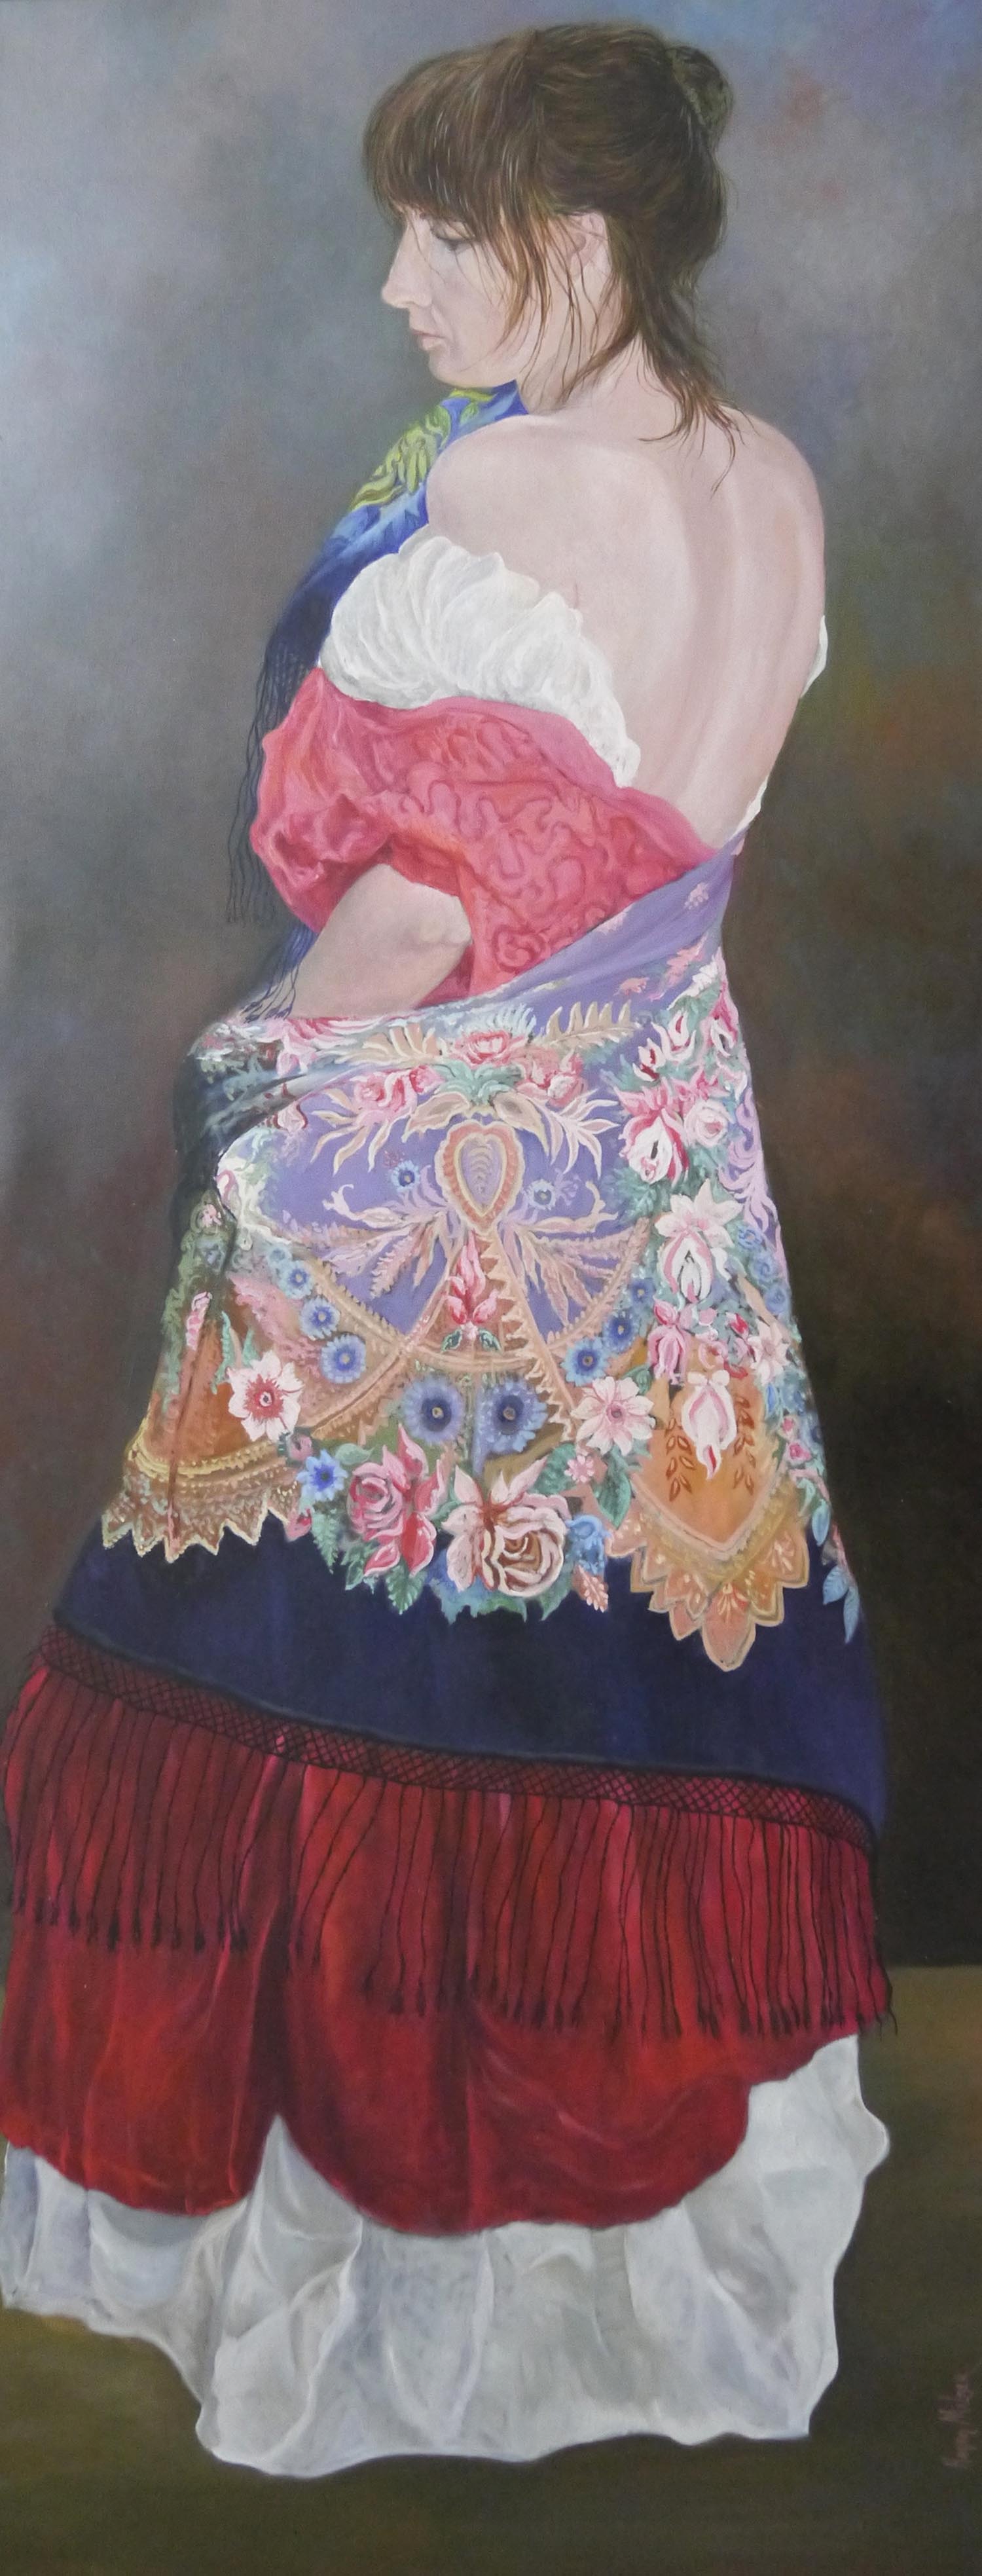 Girl with Patterned Shawl